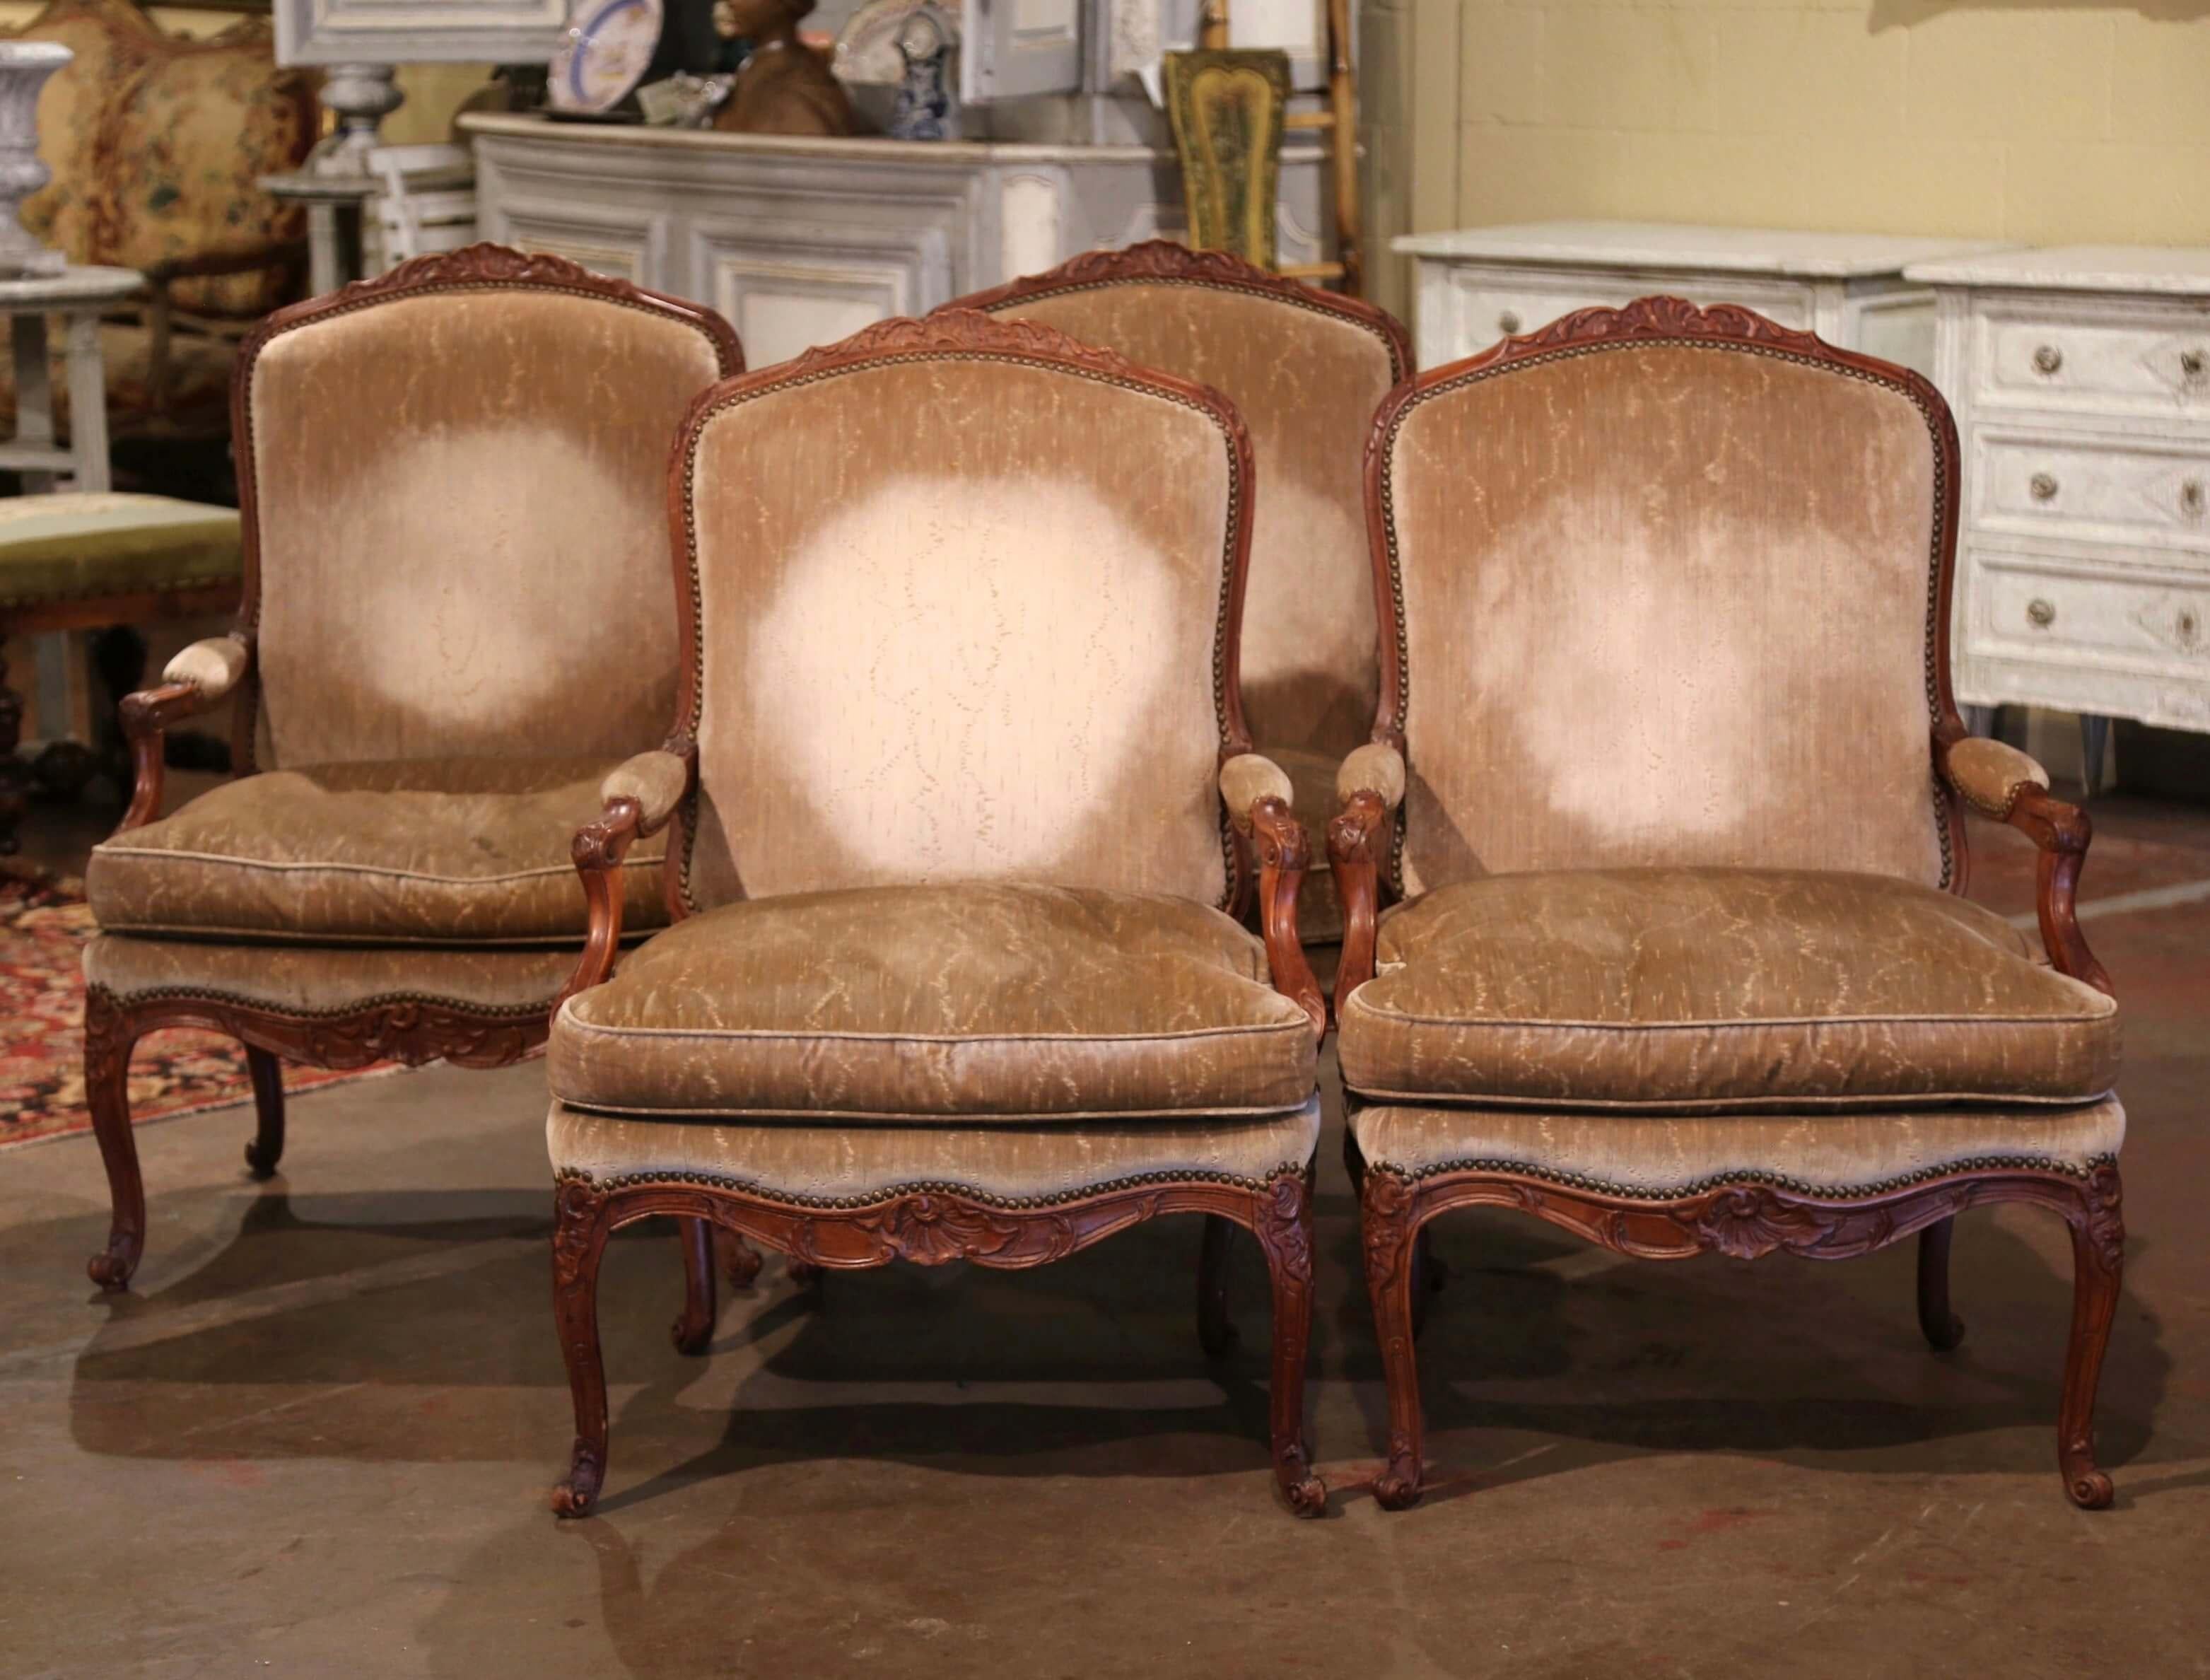 Decorate an office, study or a den with this elegant suite of four antique armchairs! Crafted in Provence, France circa 1880, each fauteuil stands on cabriole legs ending with escargot feet and decorated with hand carved floral motifs at the